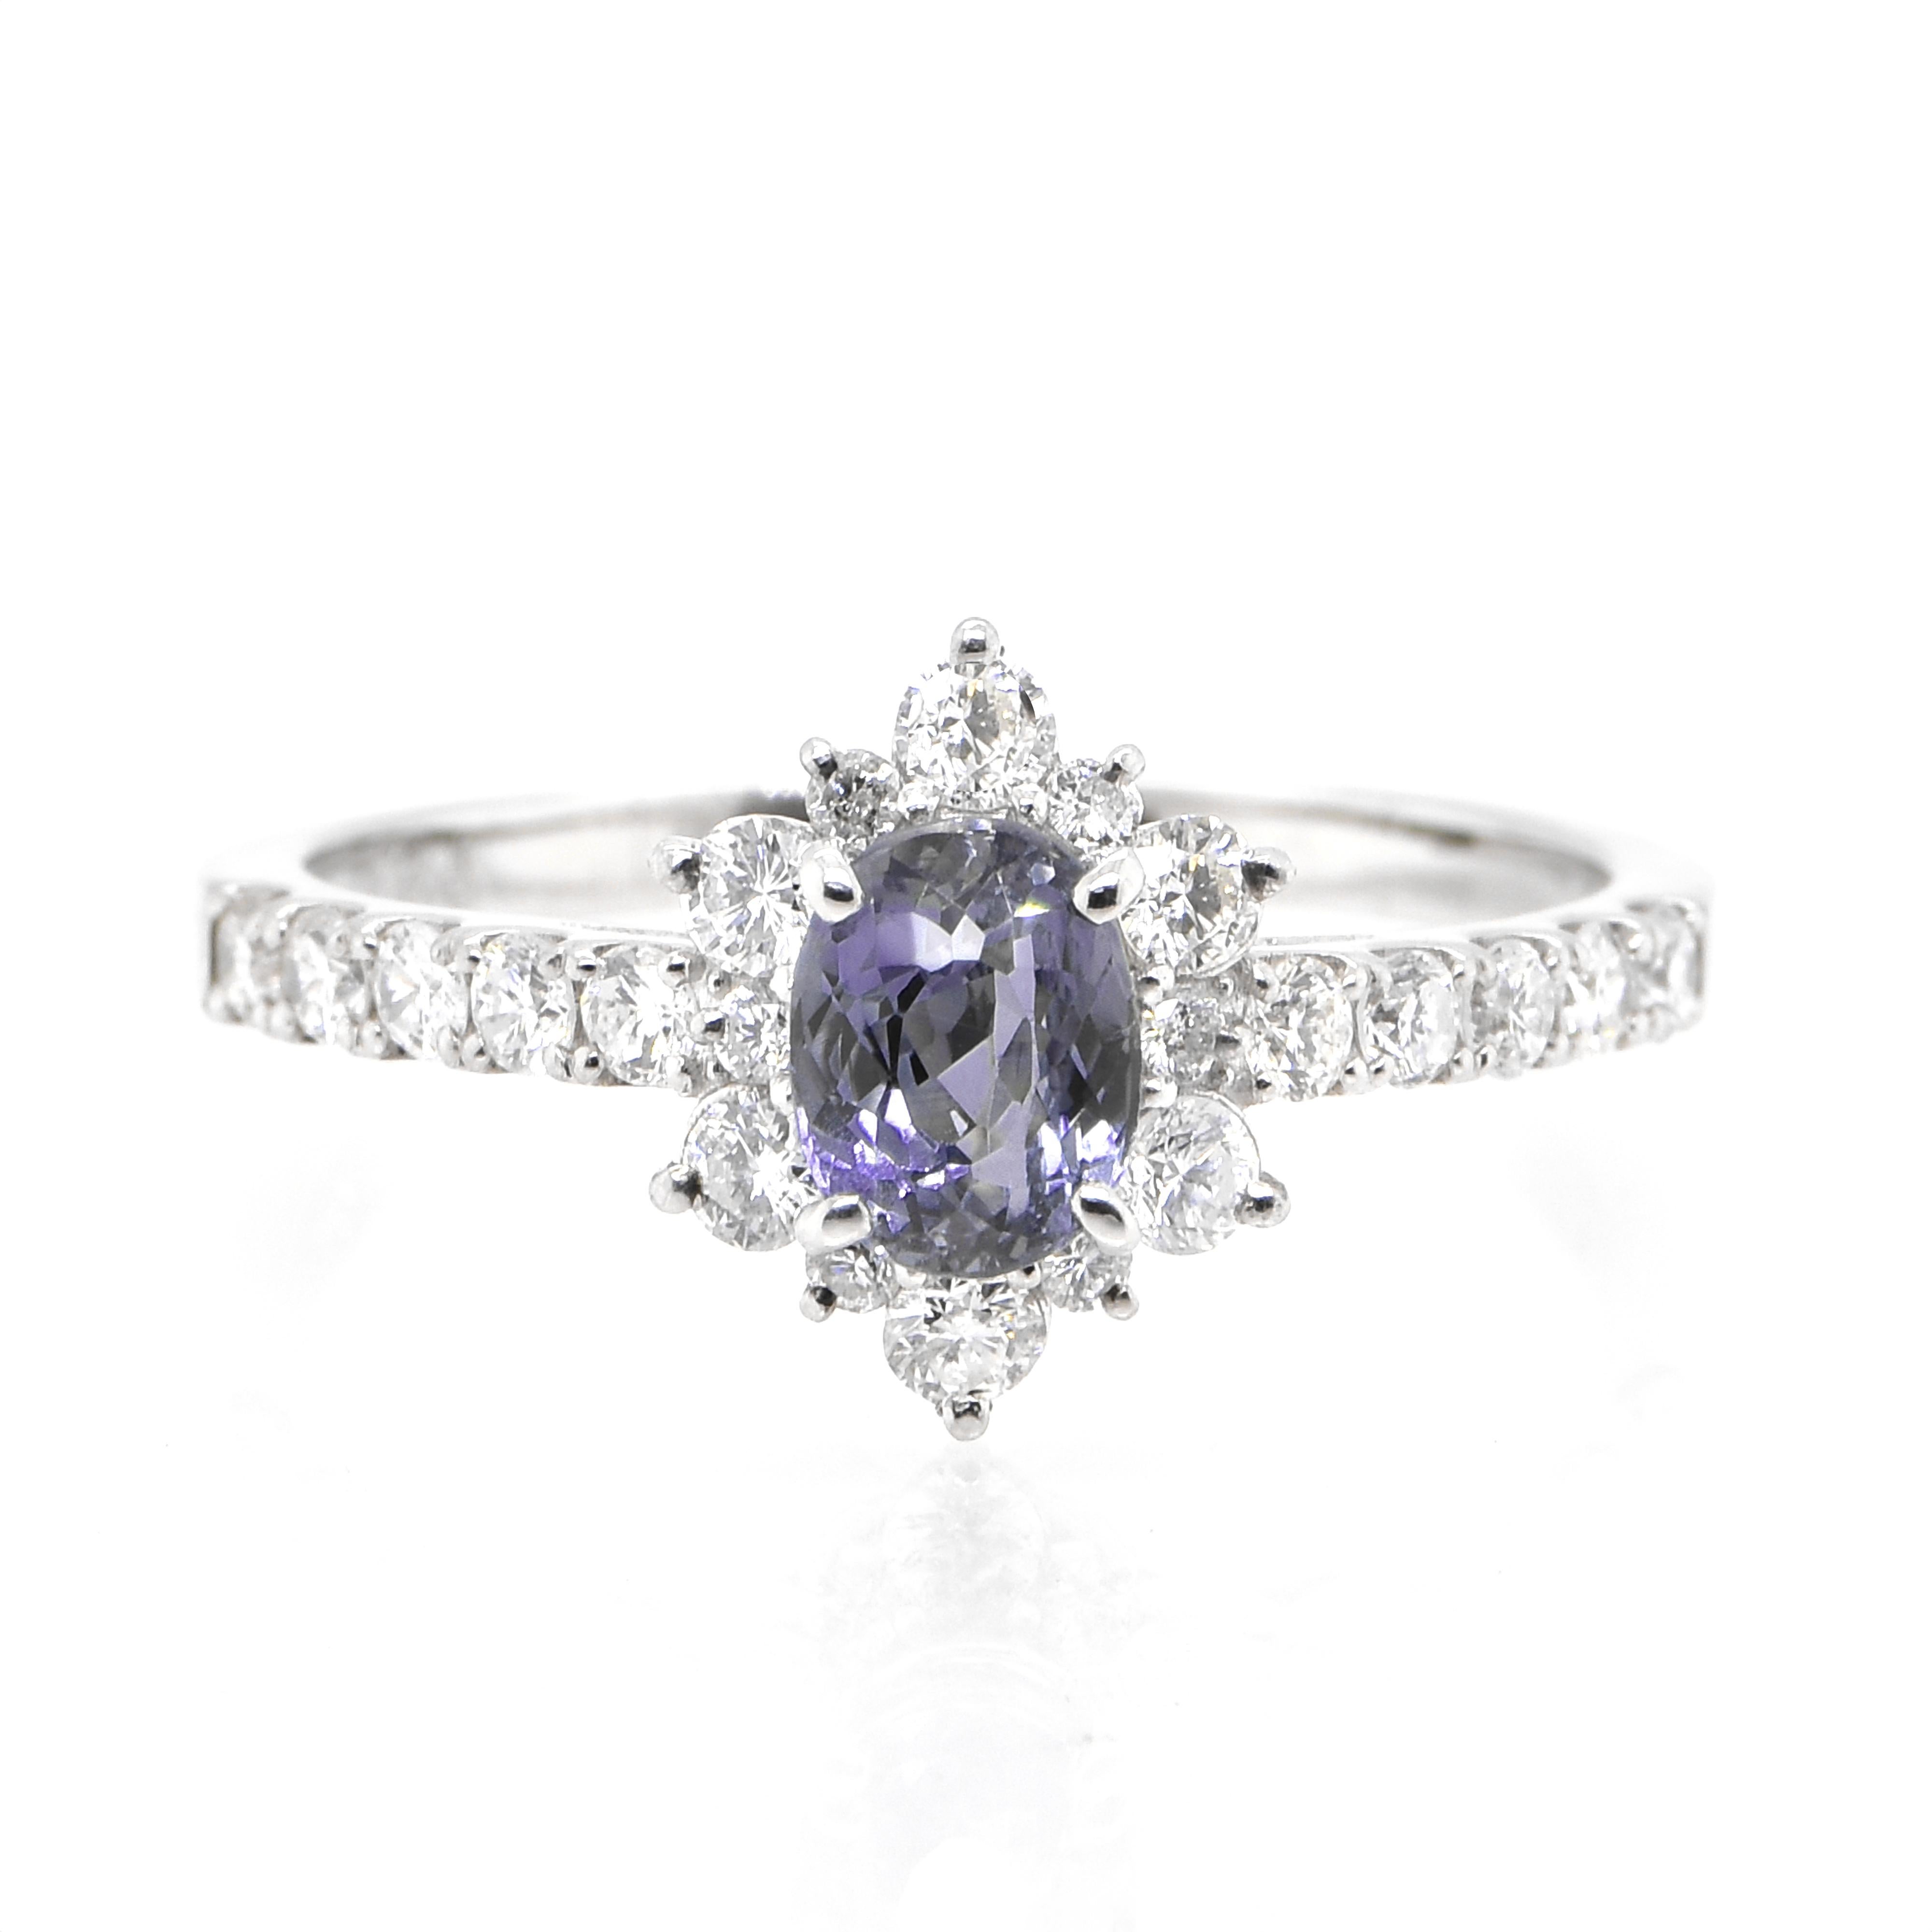 A gorgeous ring featuring GIA Certified 0.86 Carat, Nature Brazilian Alexandrite and 0.50 Carats of Diamond Accents set in Platinum. Alexandrites produce a natural color-change phenomenon as they exhibit a Bluish Green Color under Fluorescent Light